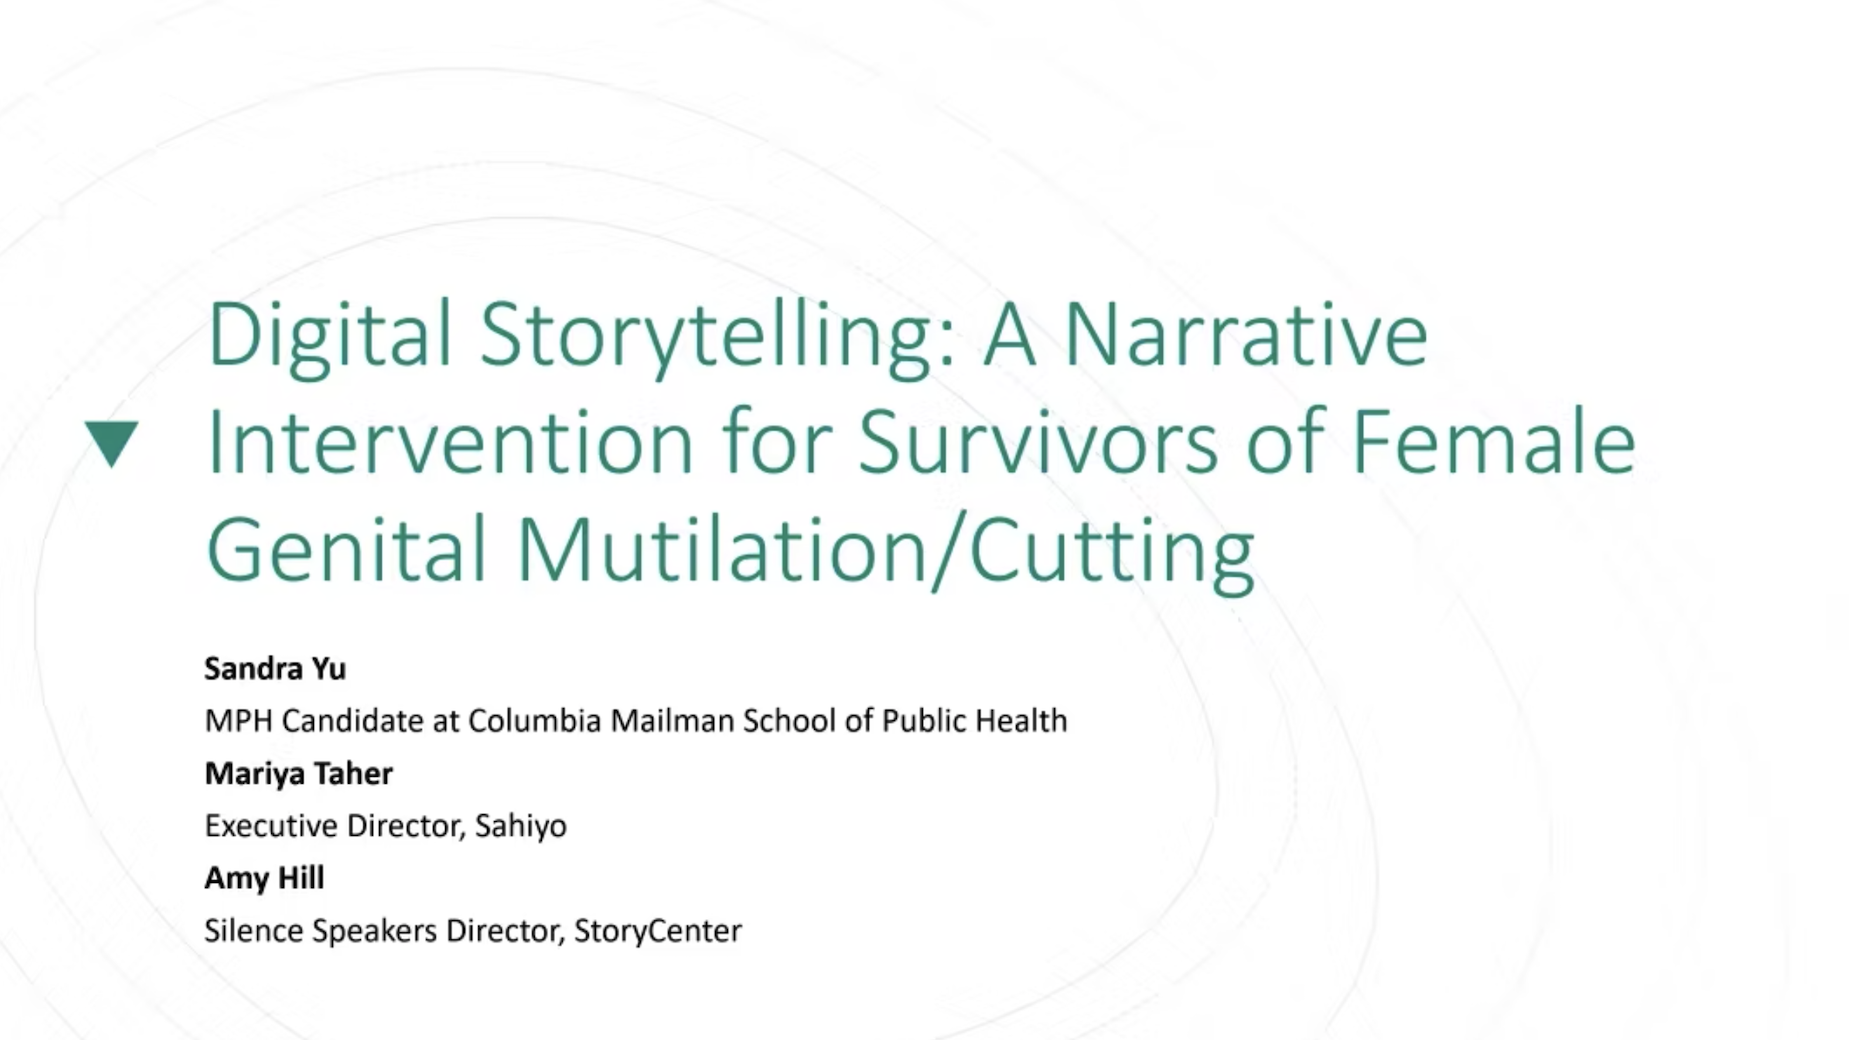 Reflections on research: Digital Storytelling as a narrative intervention for survivors of FGM/C